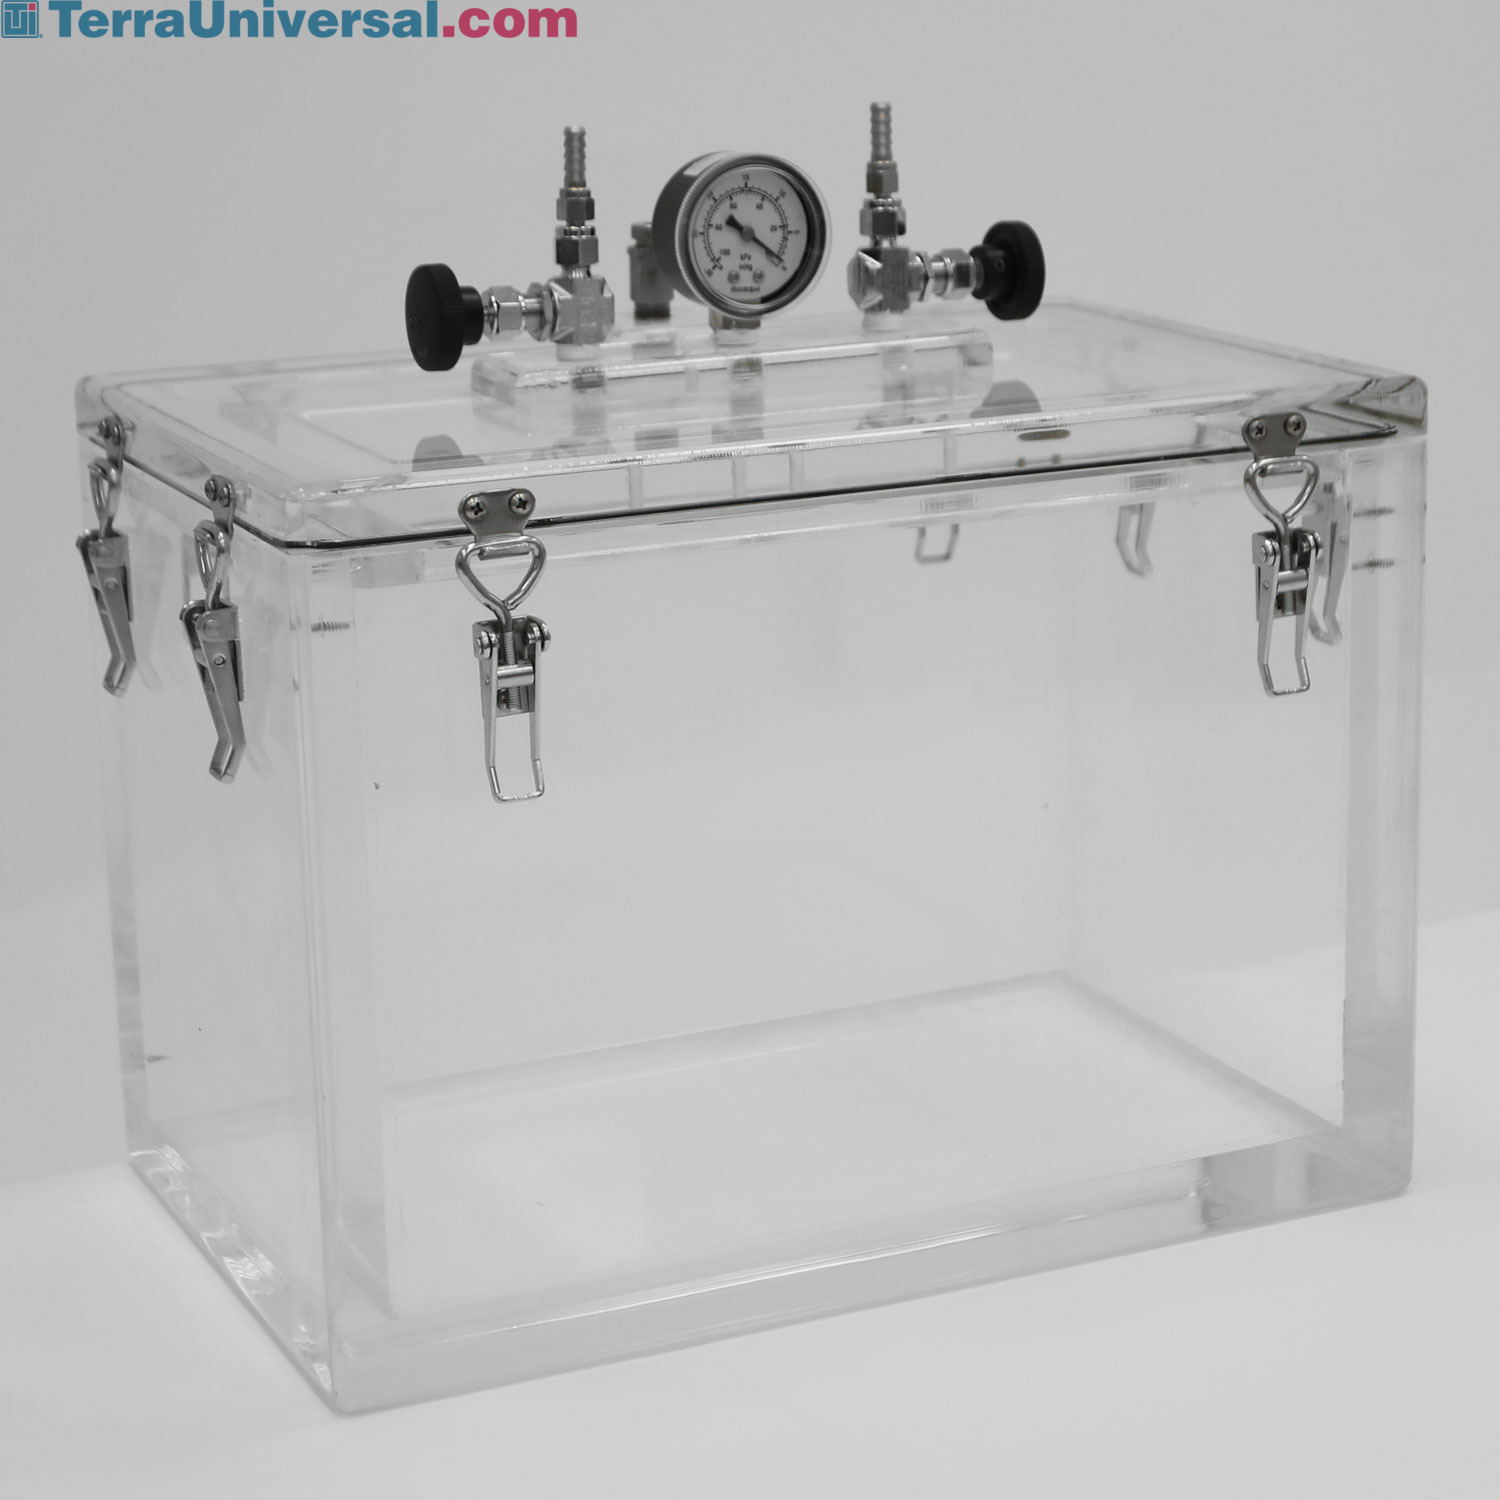 YHAspace 2 Gallon Acrylic Vacuum Chamber Acrylic Clear Perfect for Sta